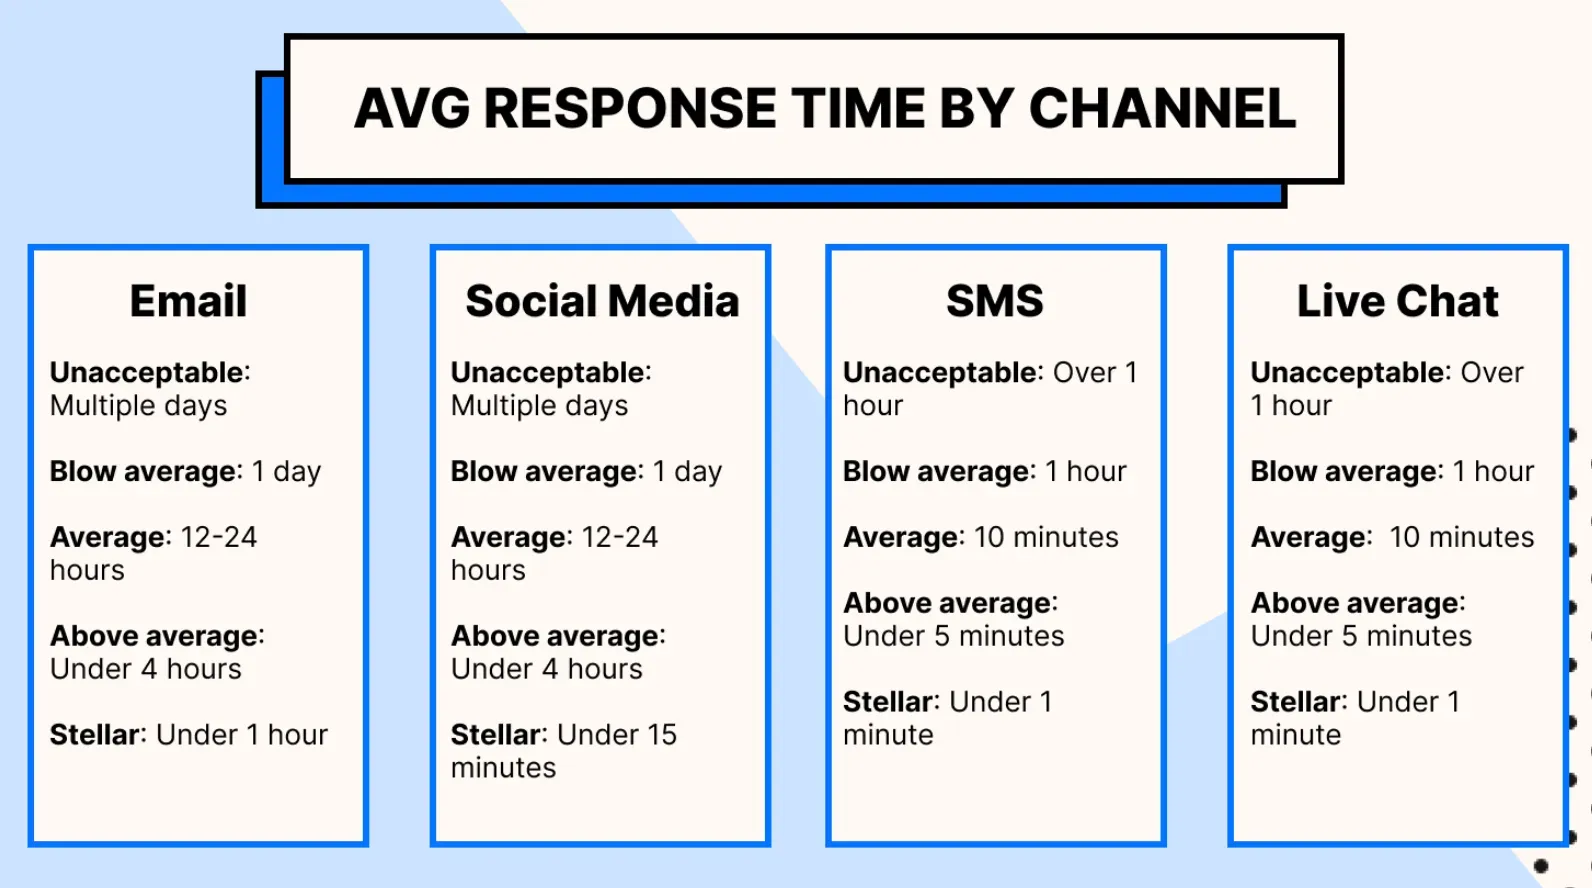 Average Response Time across Different Channels